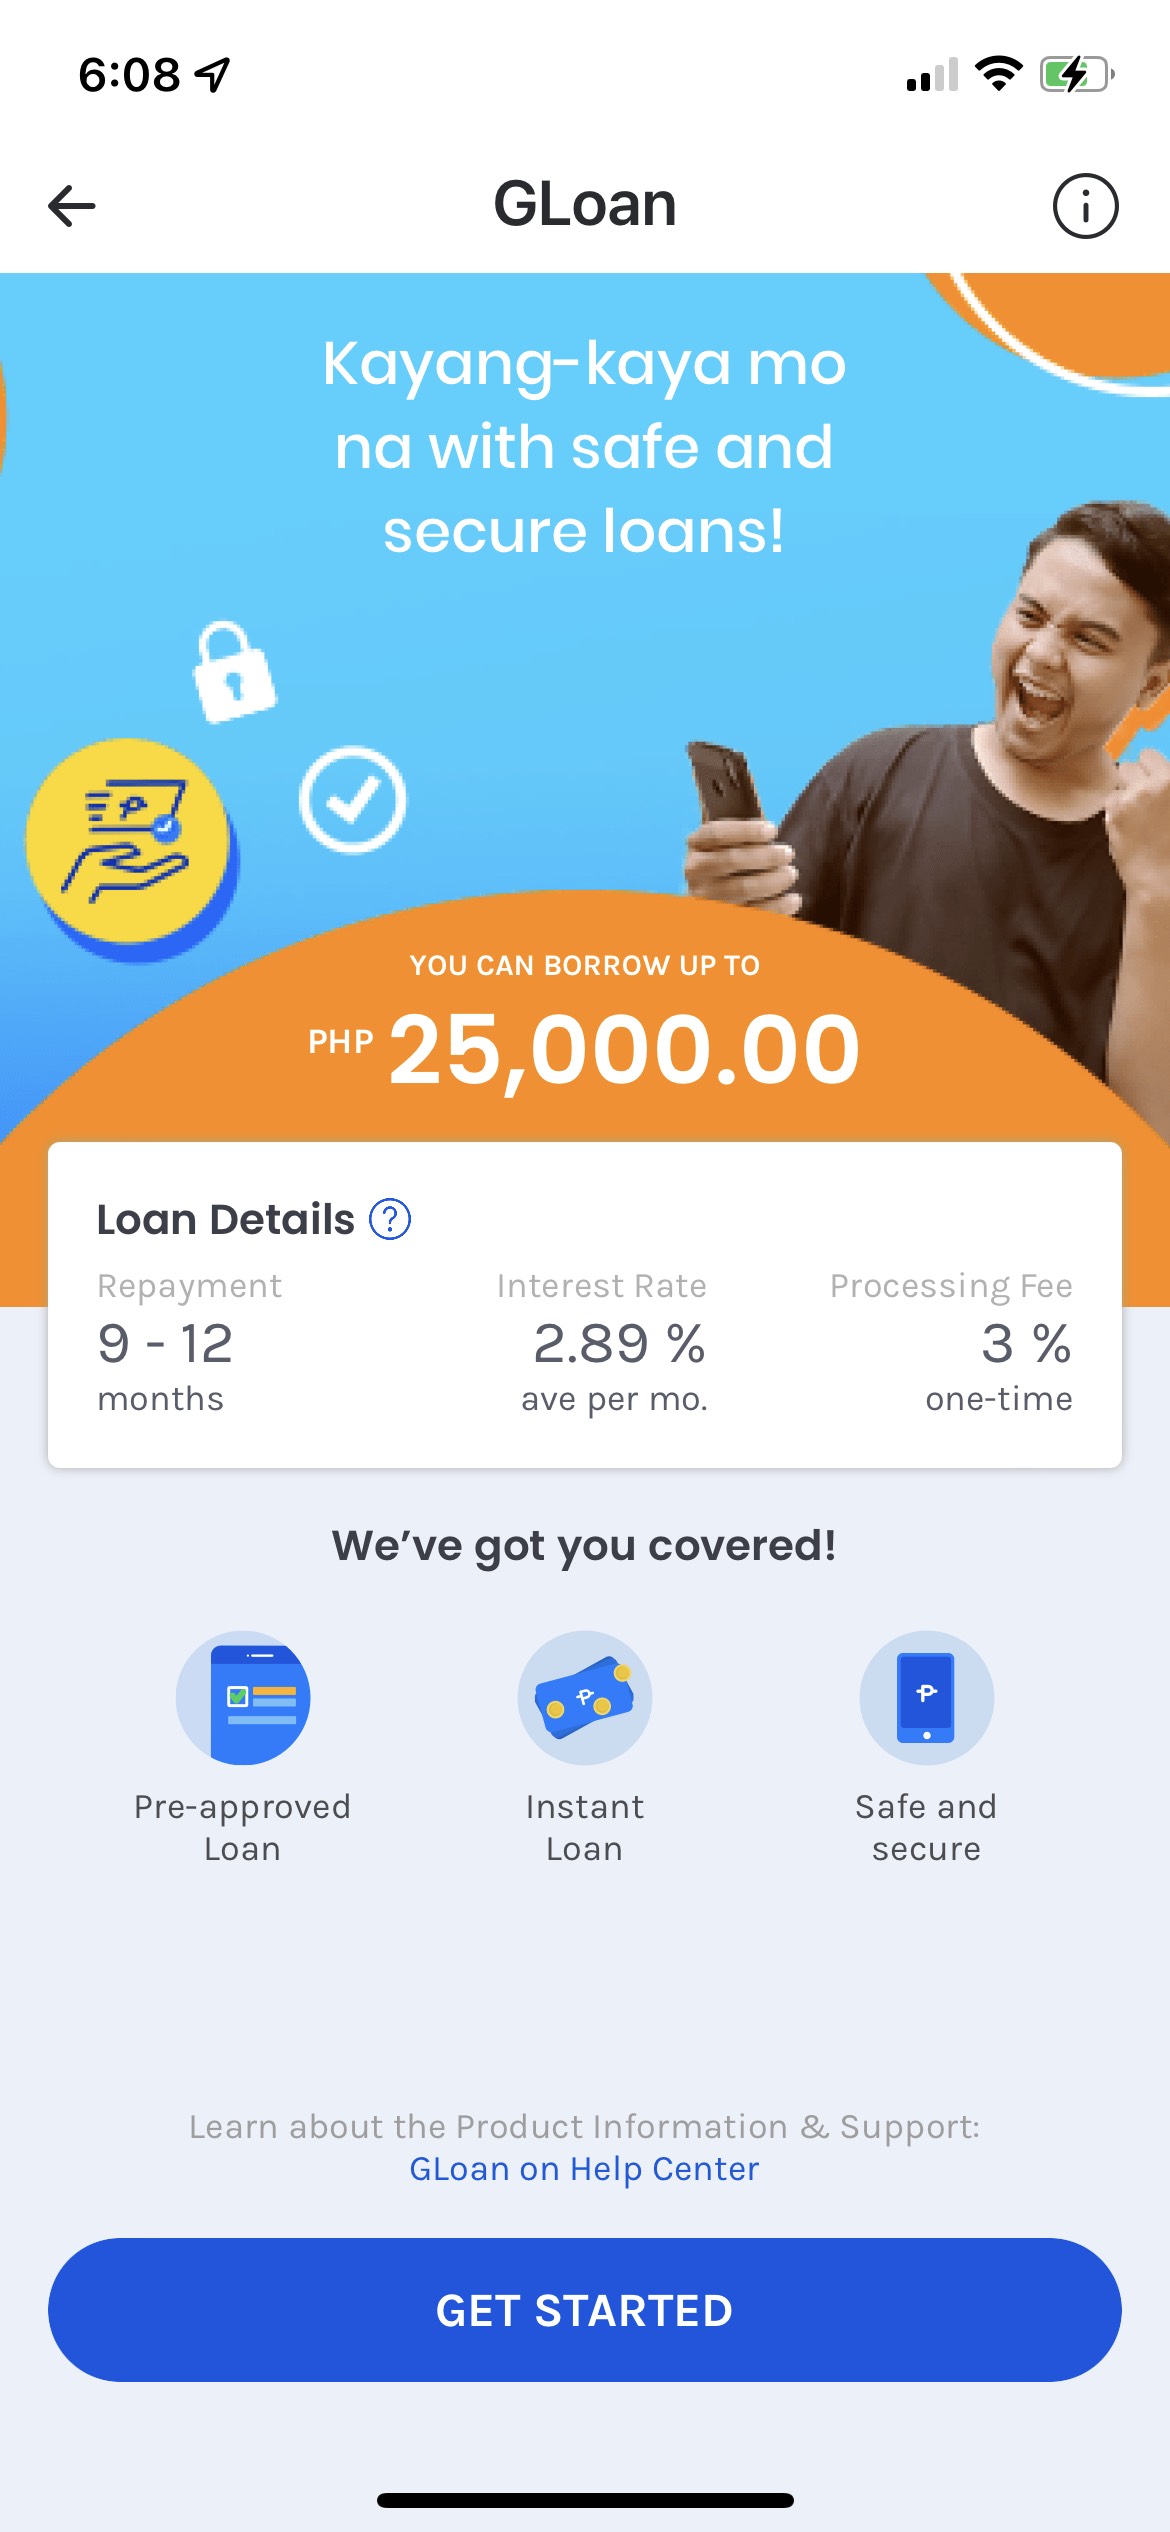 GCASH Offers Loan Options: How to Apply for GLoan